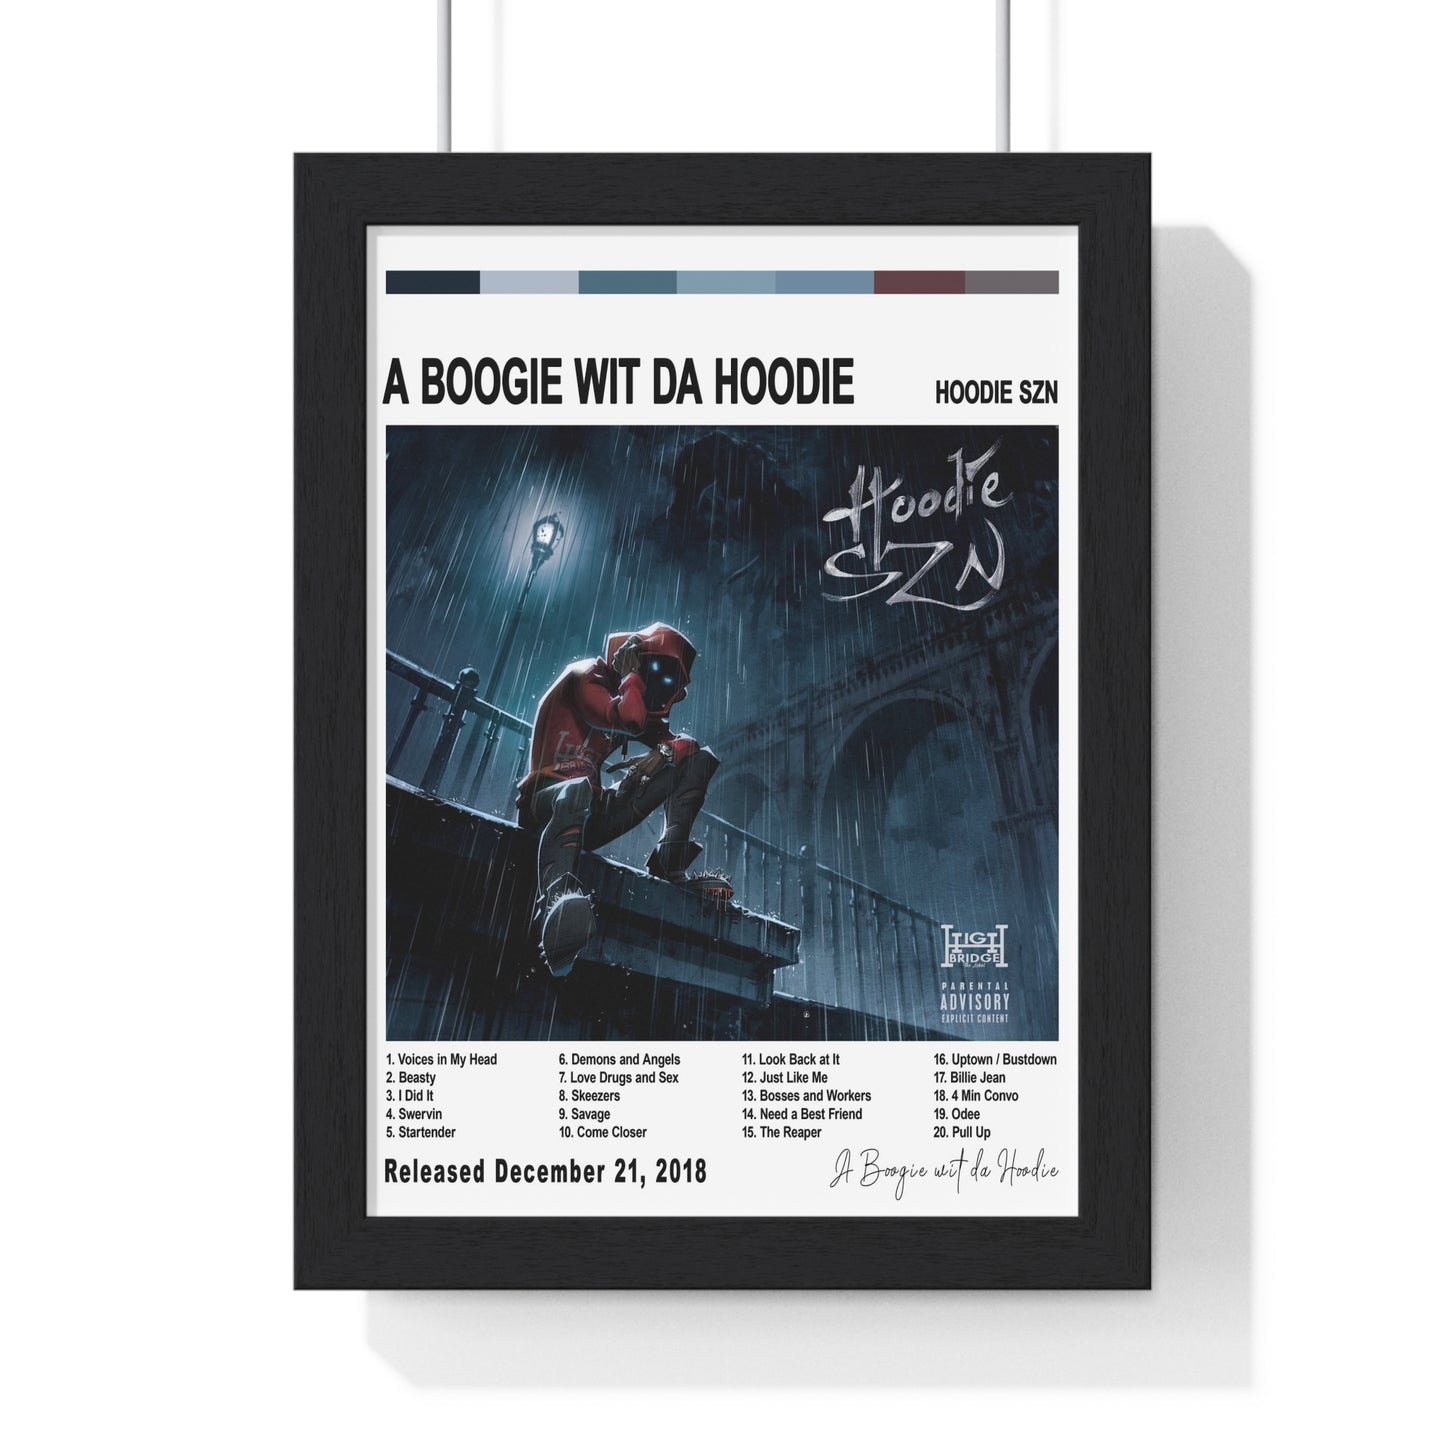 A Boogie wit da Hoodie Album Cover Poster